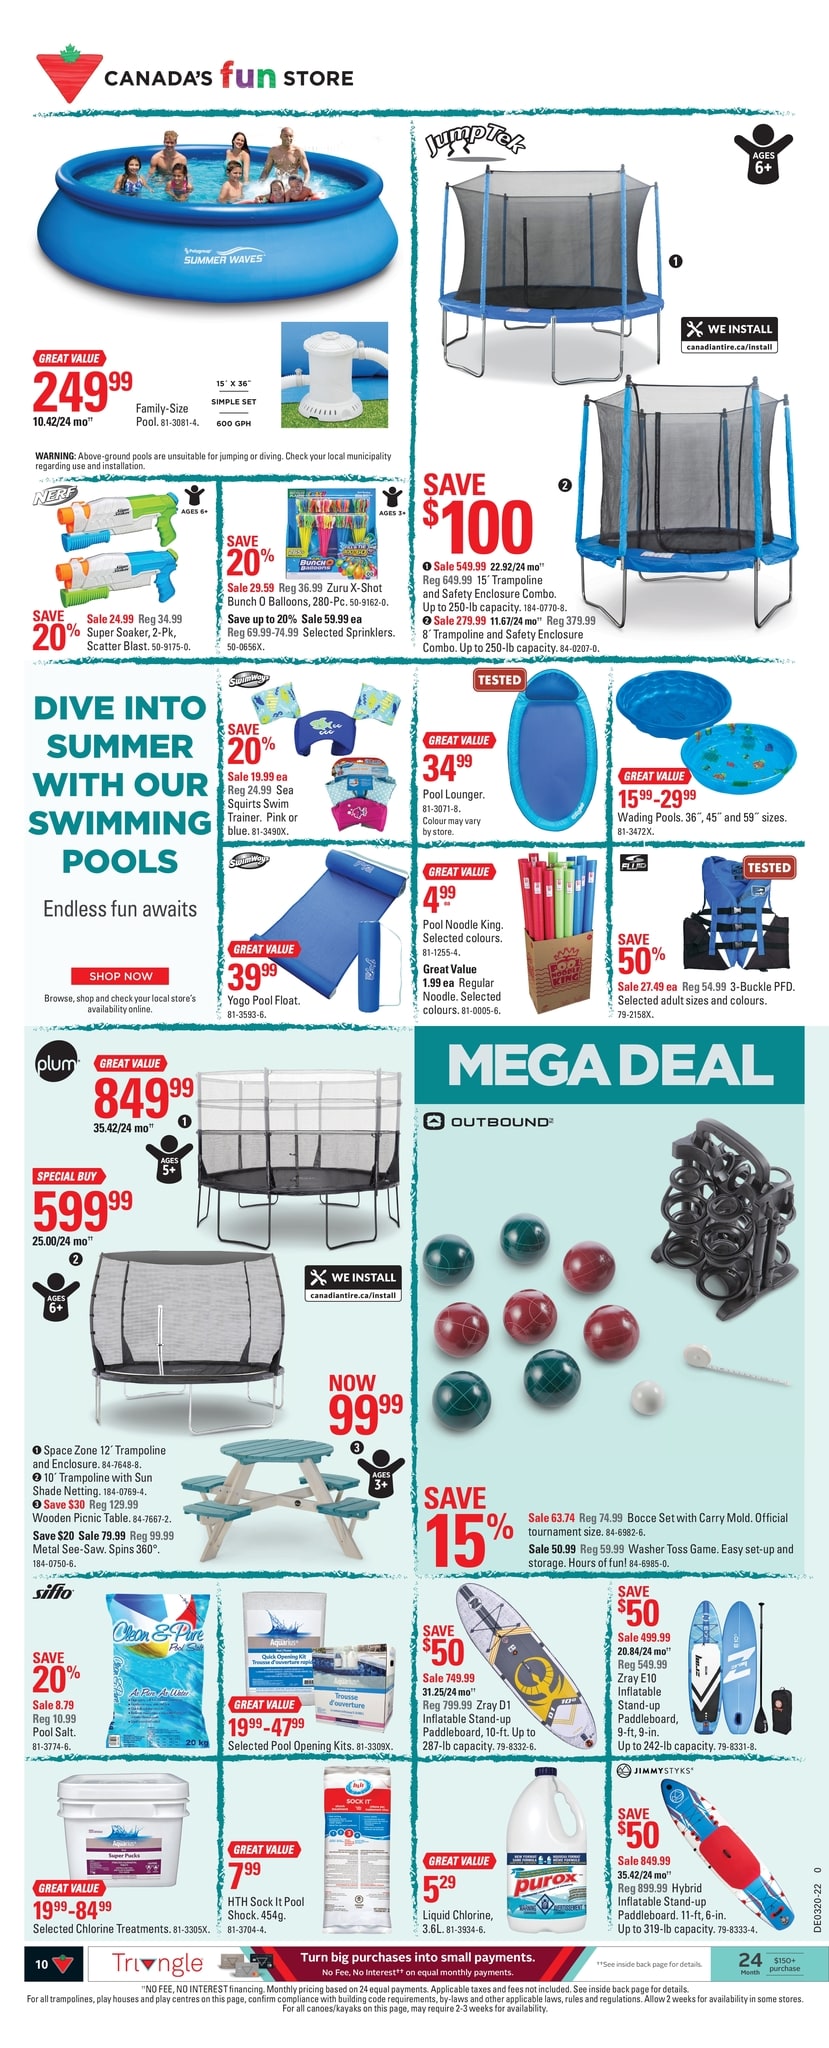 Canadian Tire - Weekly Flyer Specials - Page 10